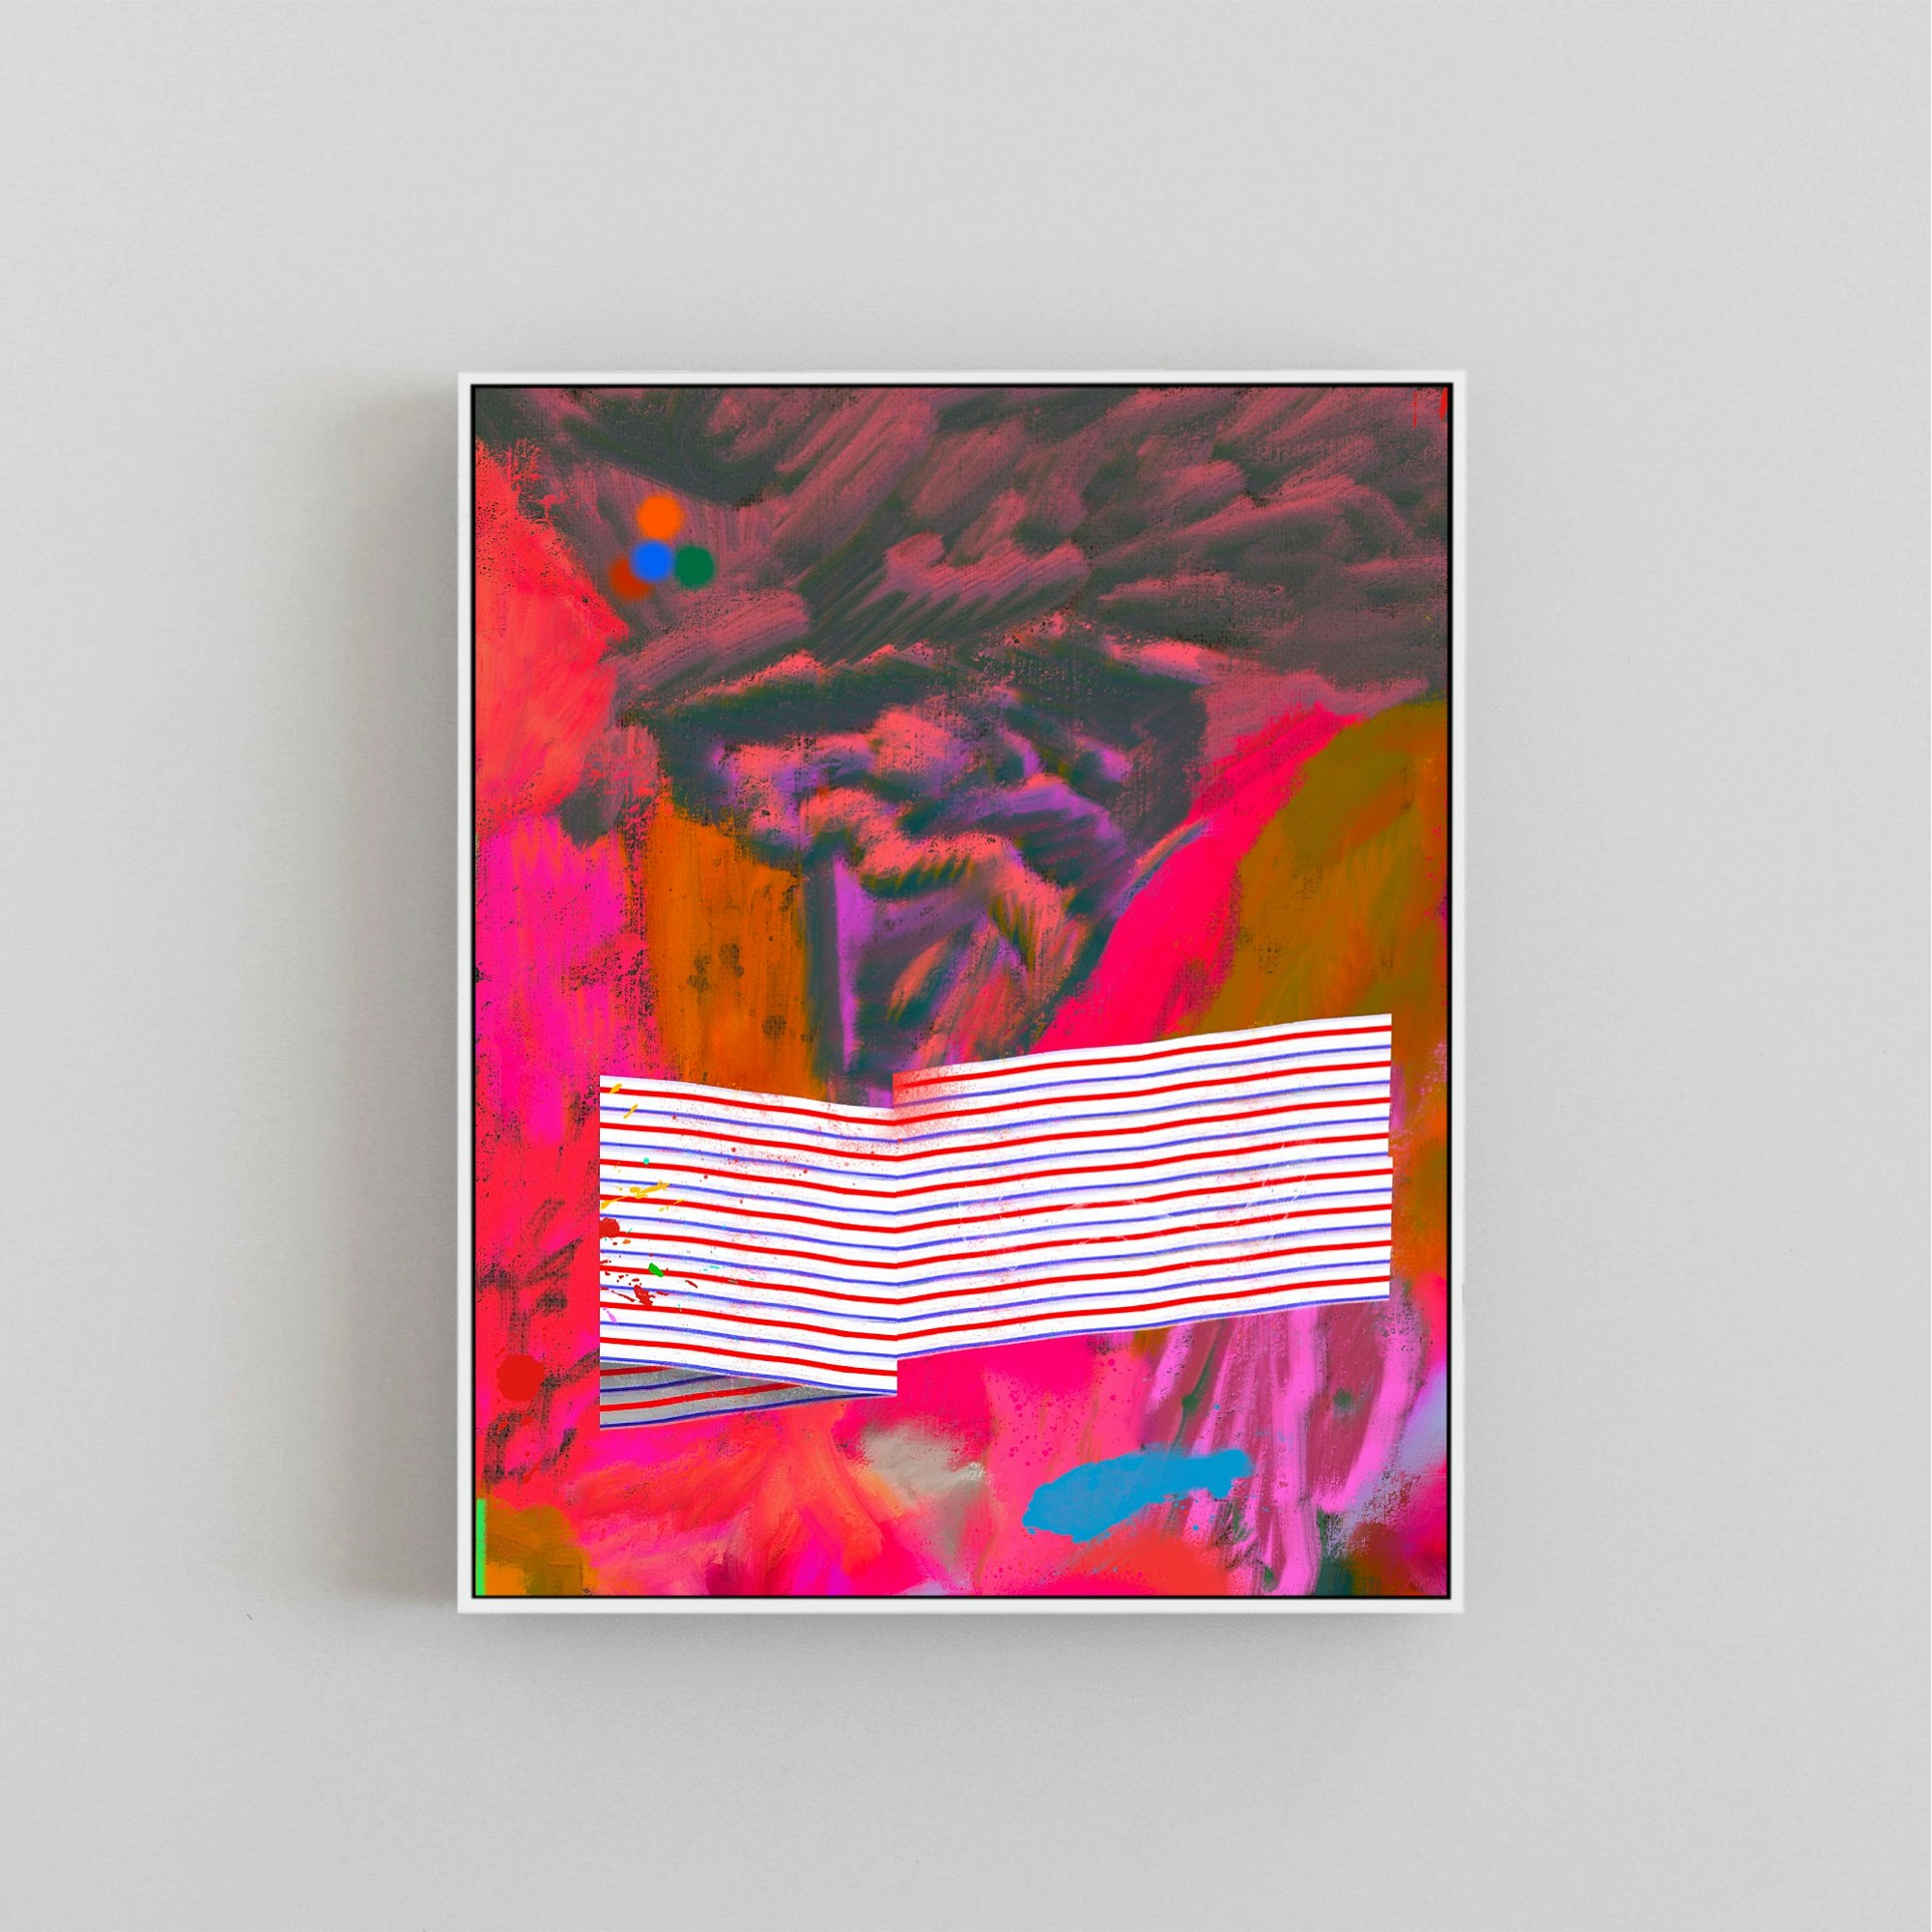 Hot Pink abstract with red white and blue 3D stripes